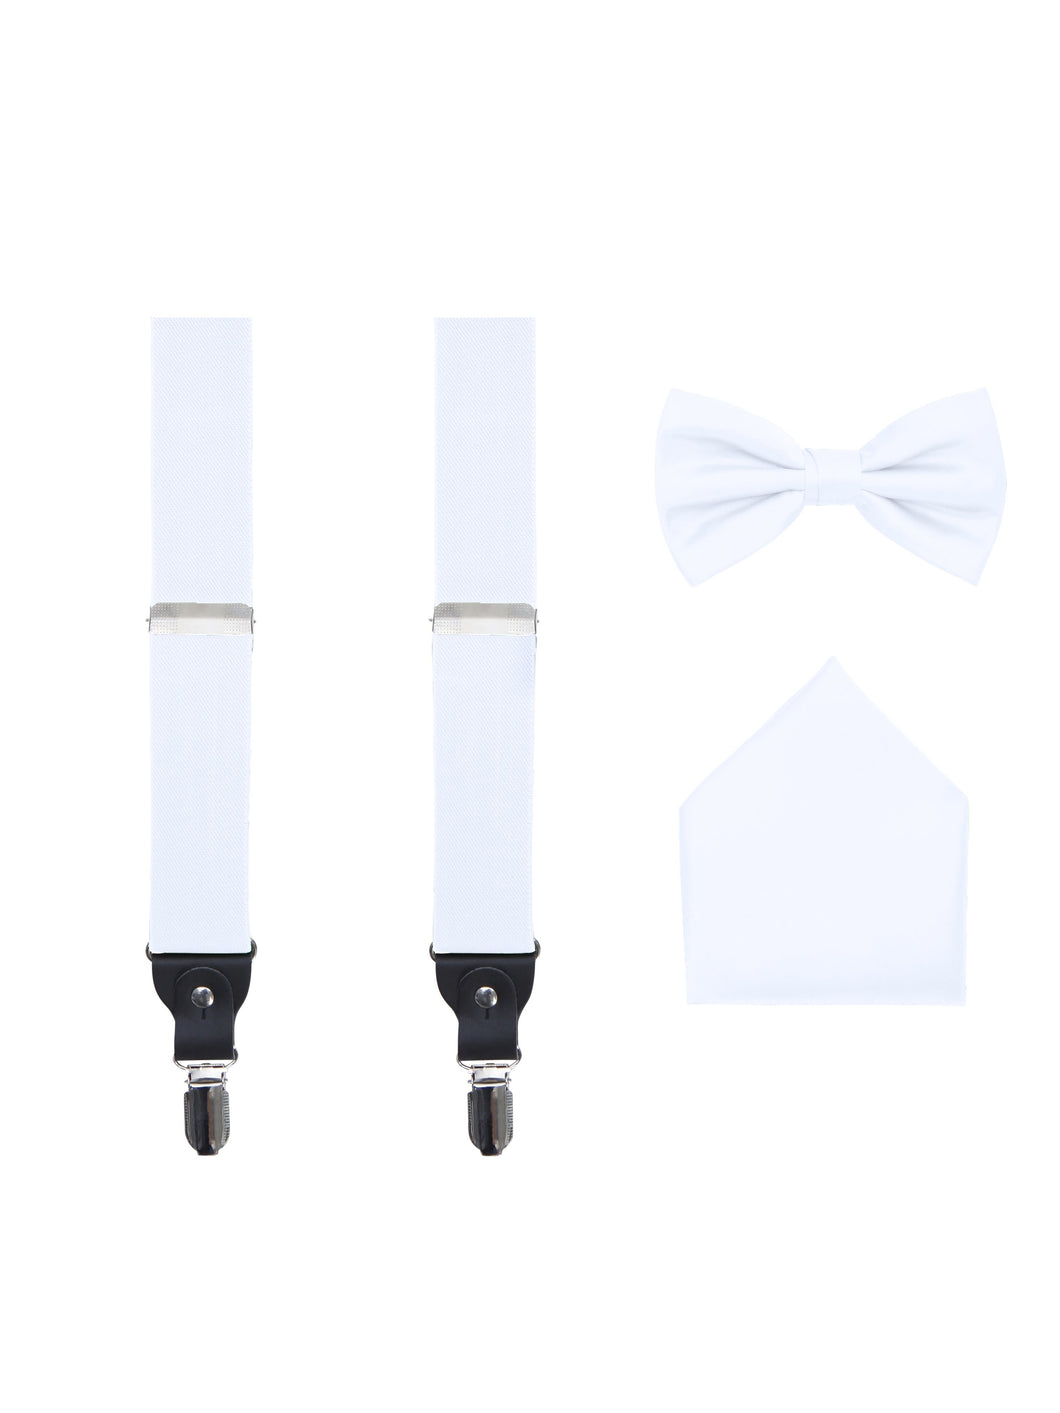 S.H. Churchill & Co. Men's 3 Piece White Suspender Set - Includes Suspenders, Matching Bow Tie, Pocket Hanky and Gift Box